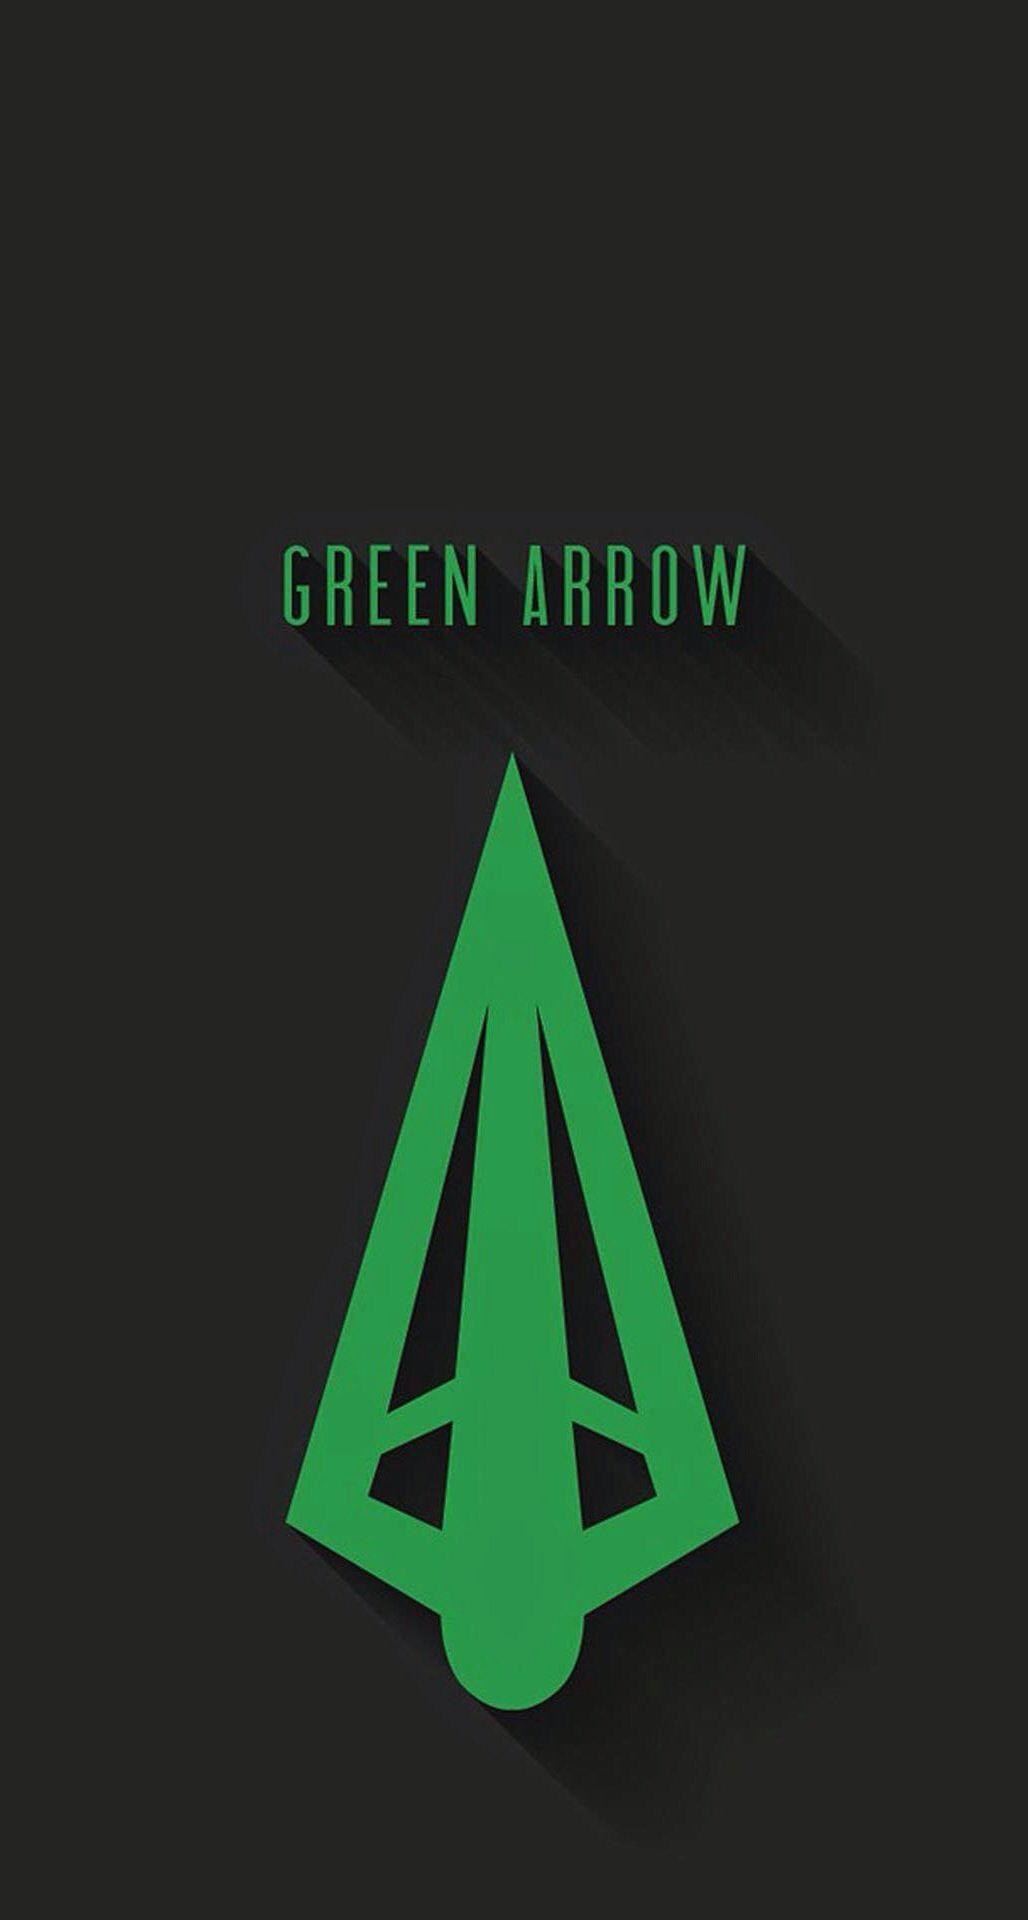 Cool Green Logo - Green Arrow icon (Would make a cool Tattoo!) | It's not easy being ...